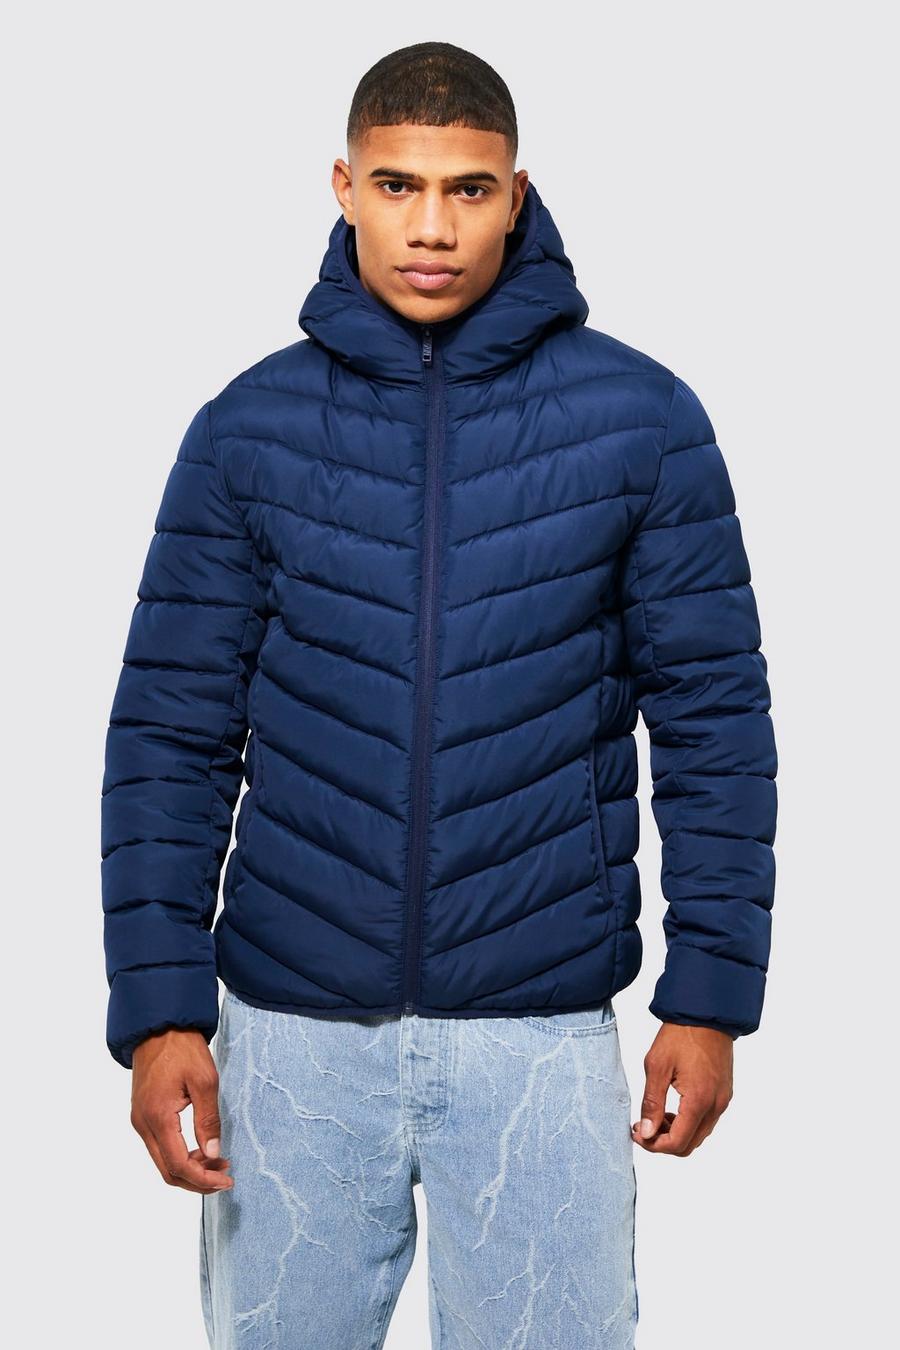 Navy blu oltremare Quilted Zip Through Jacket With Hood